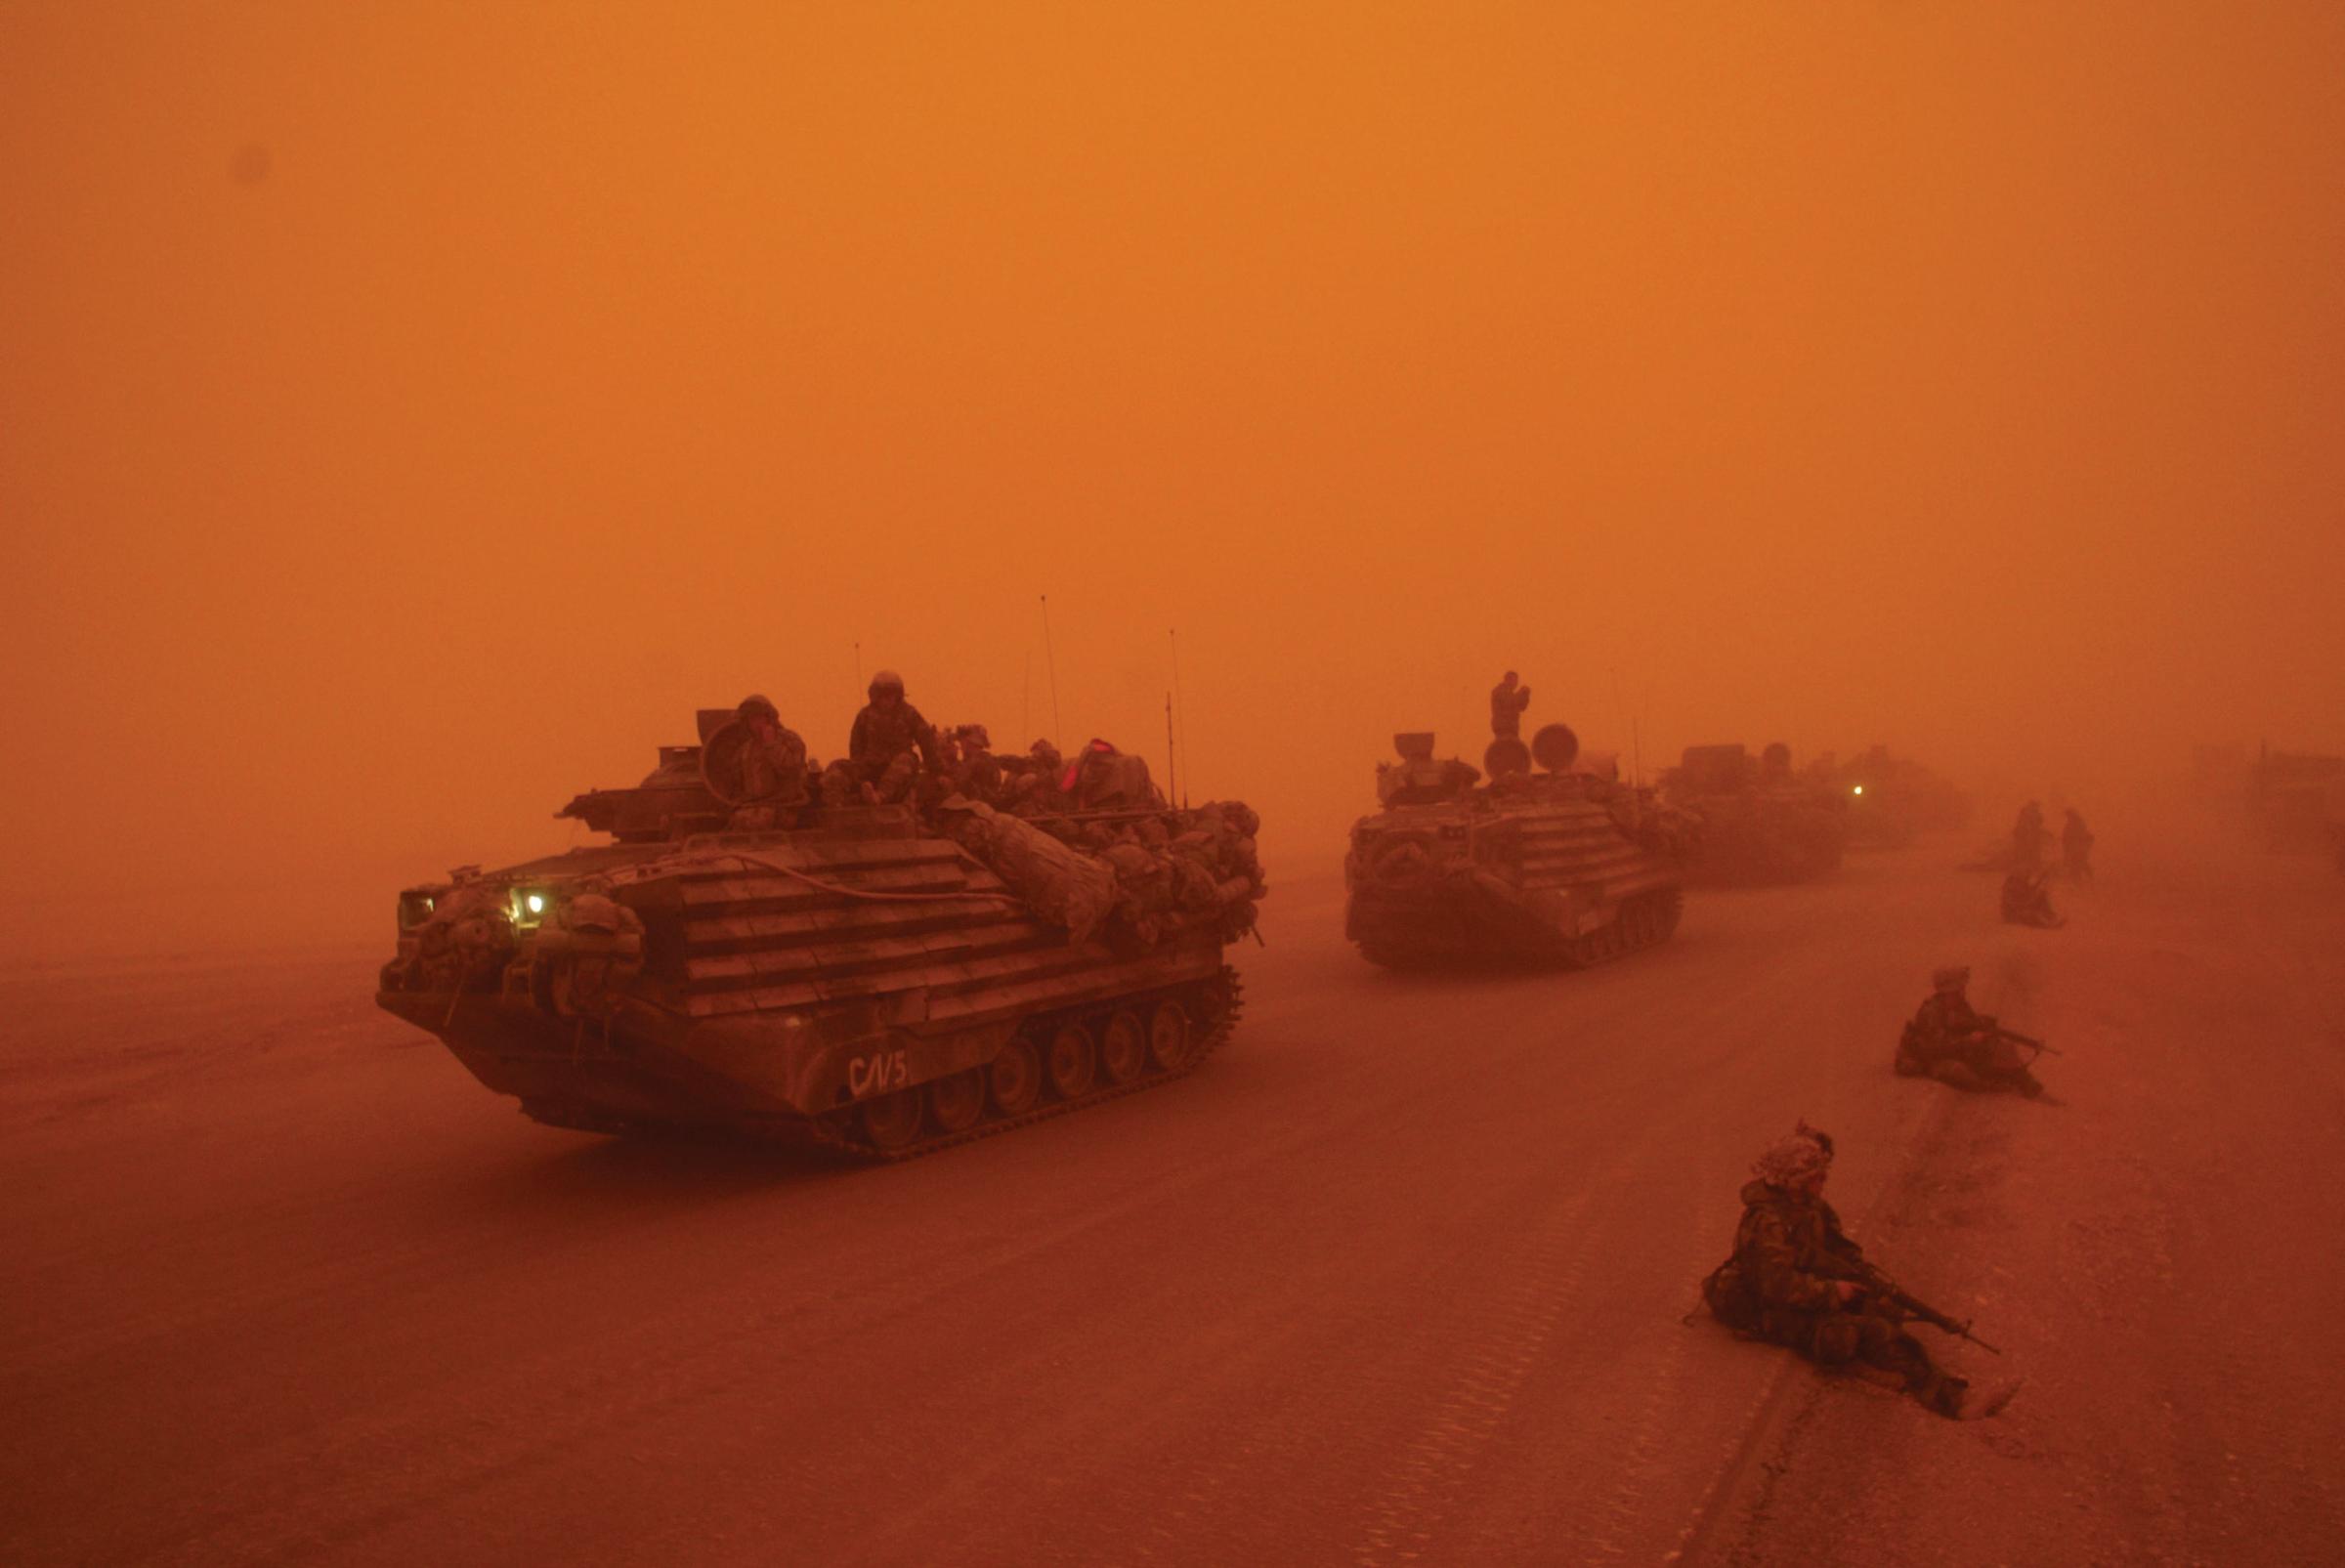 A severe sandstorm blankets a convoy from the Headquarters Battalion of the 1st Marine Division north of the Euphrates River in Iraq.